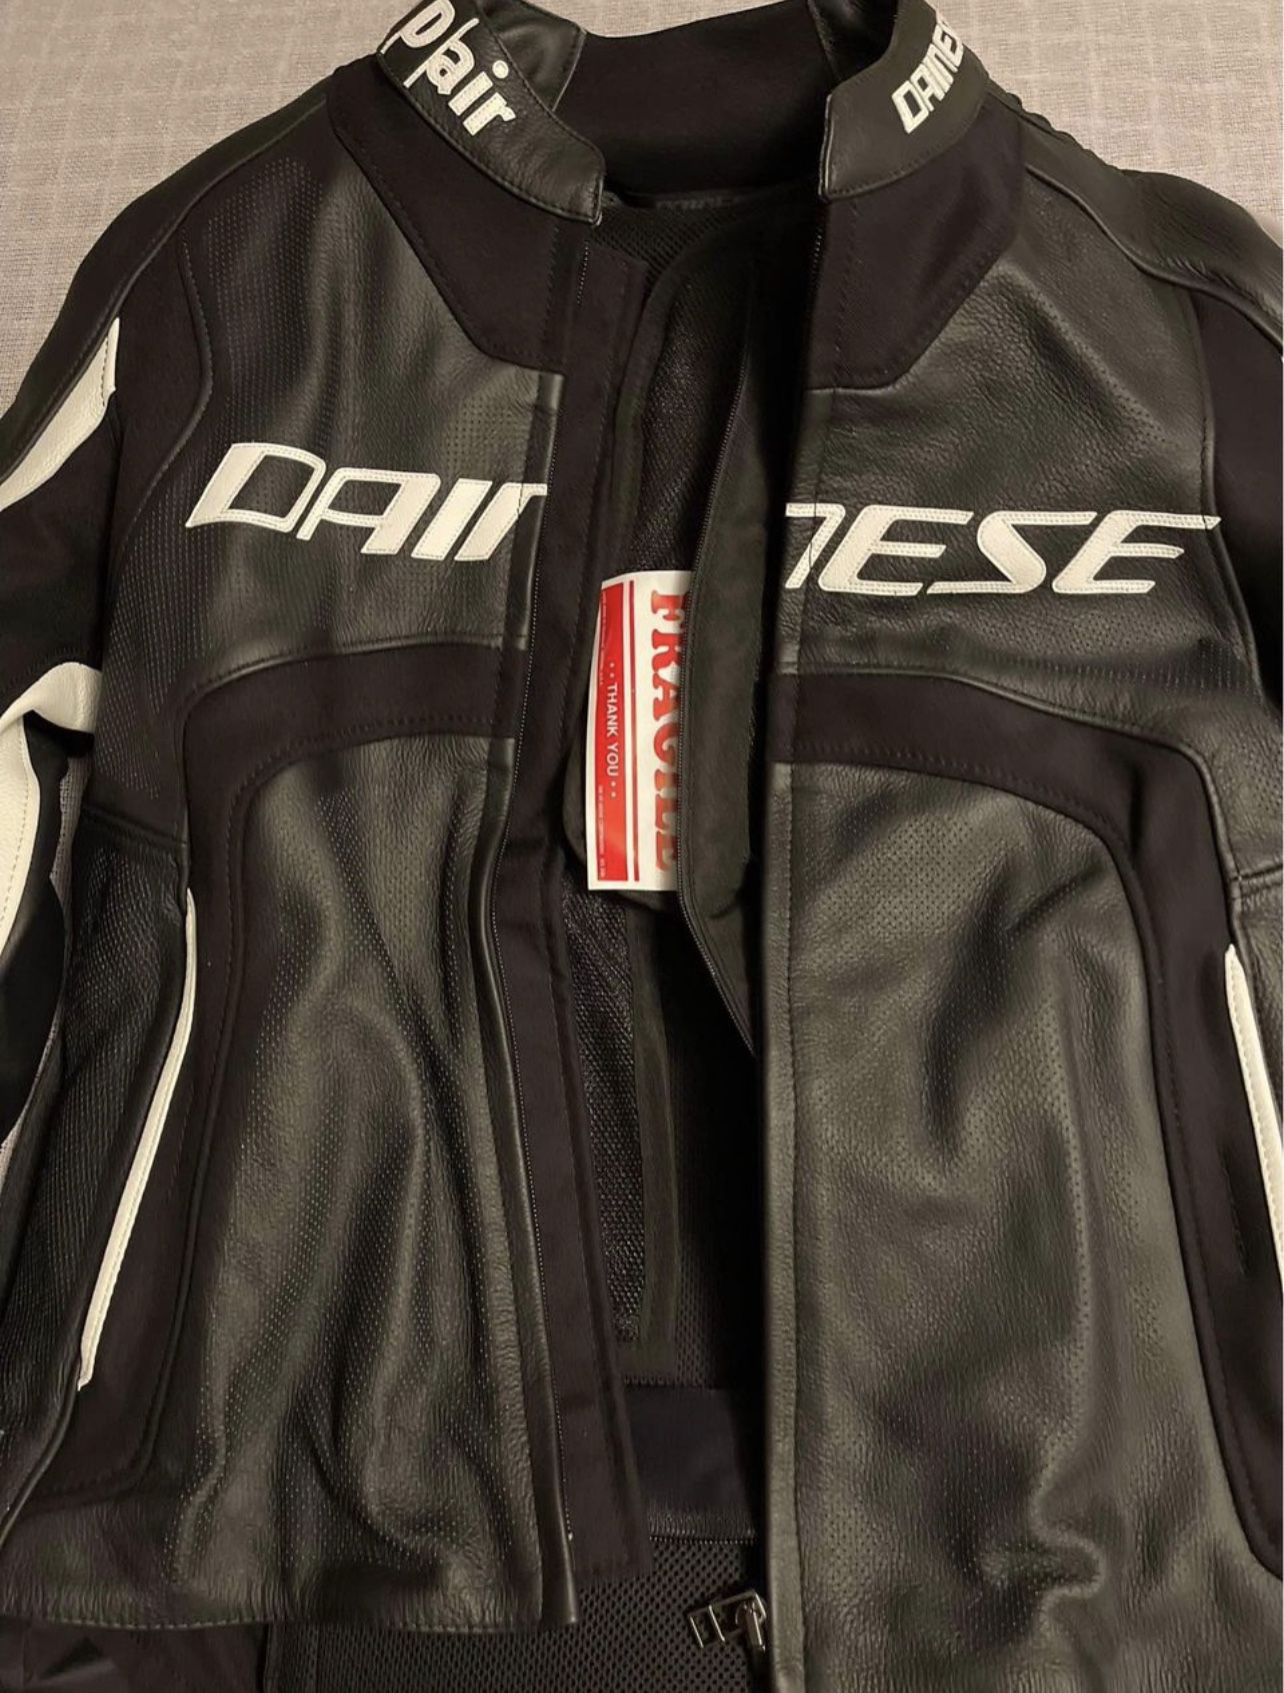 Dainese D-Air Jacket Size 52